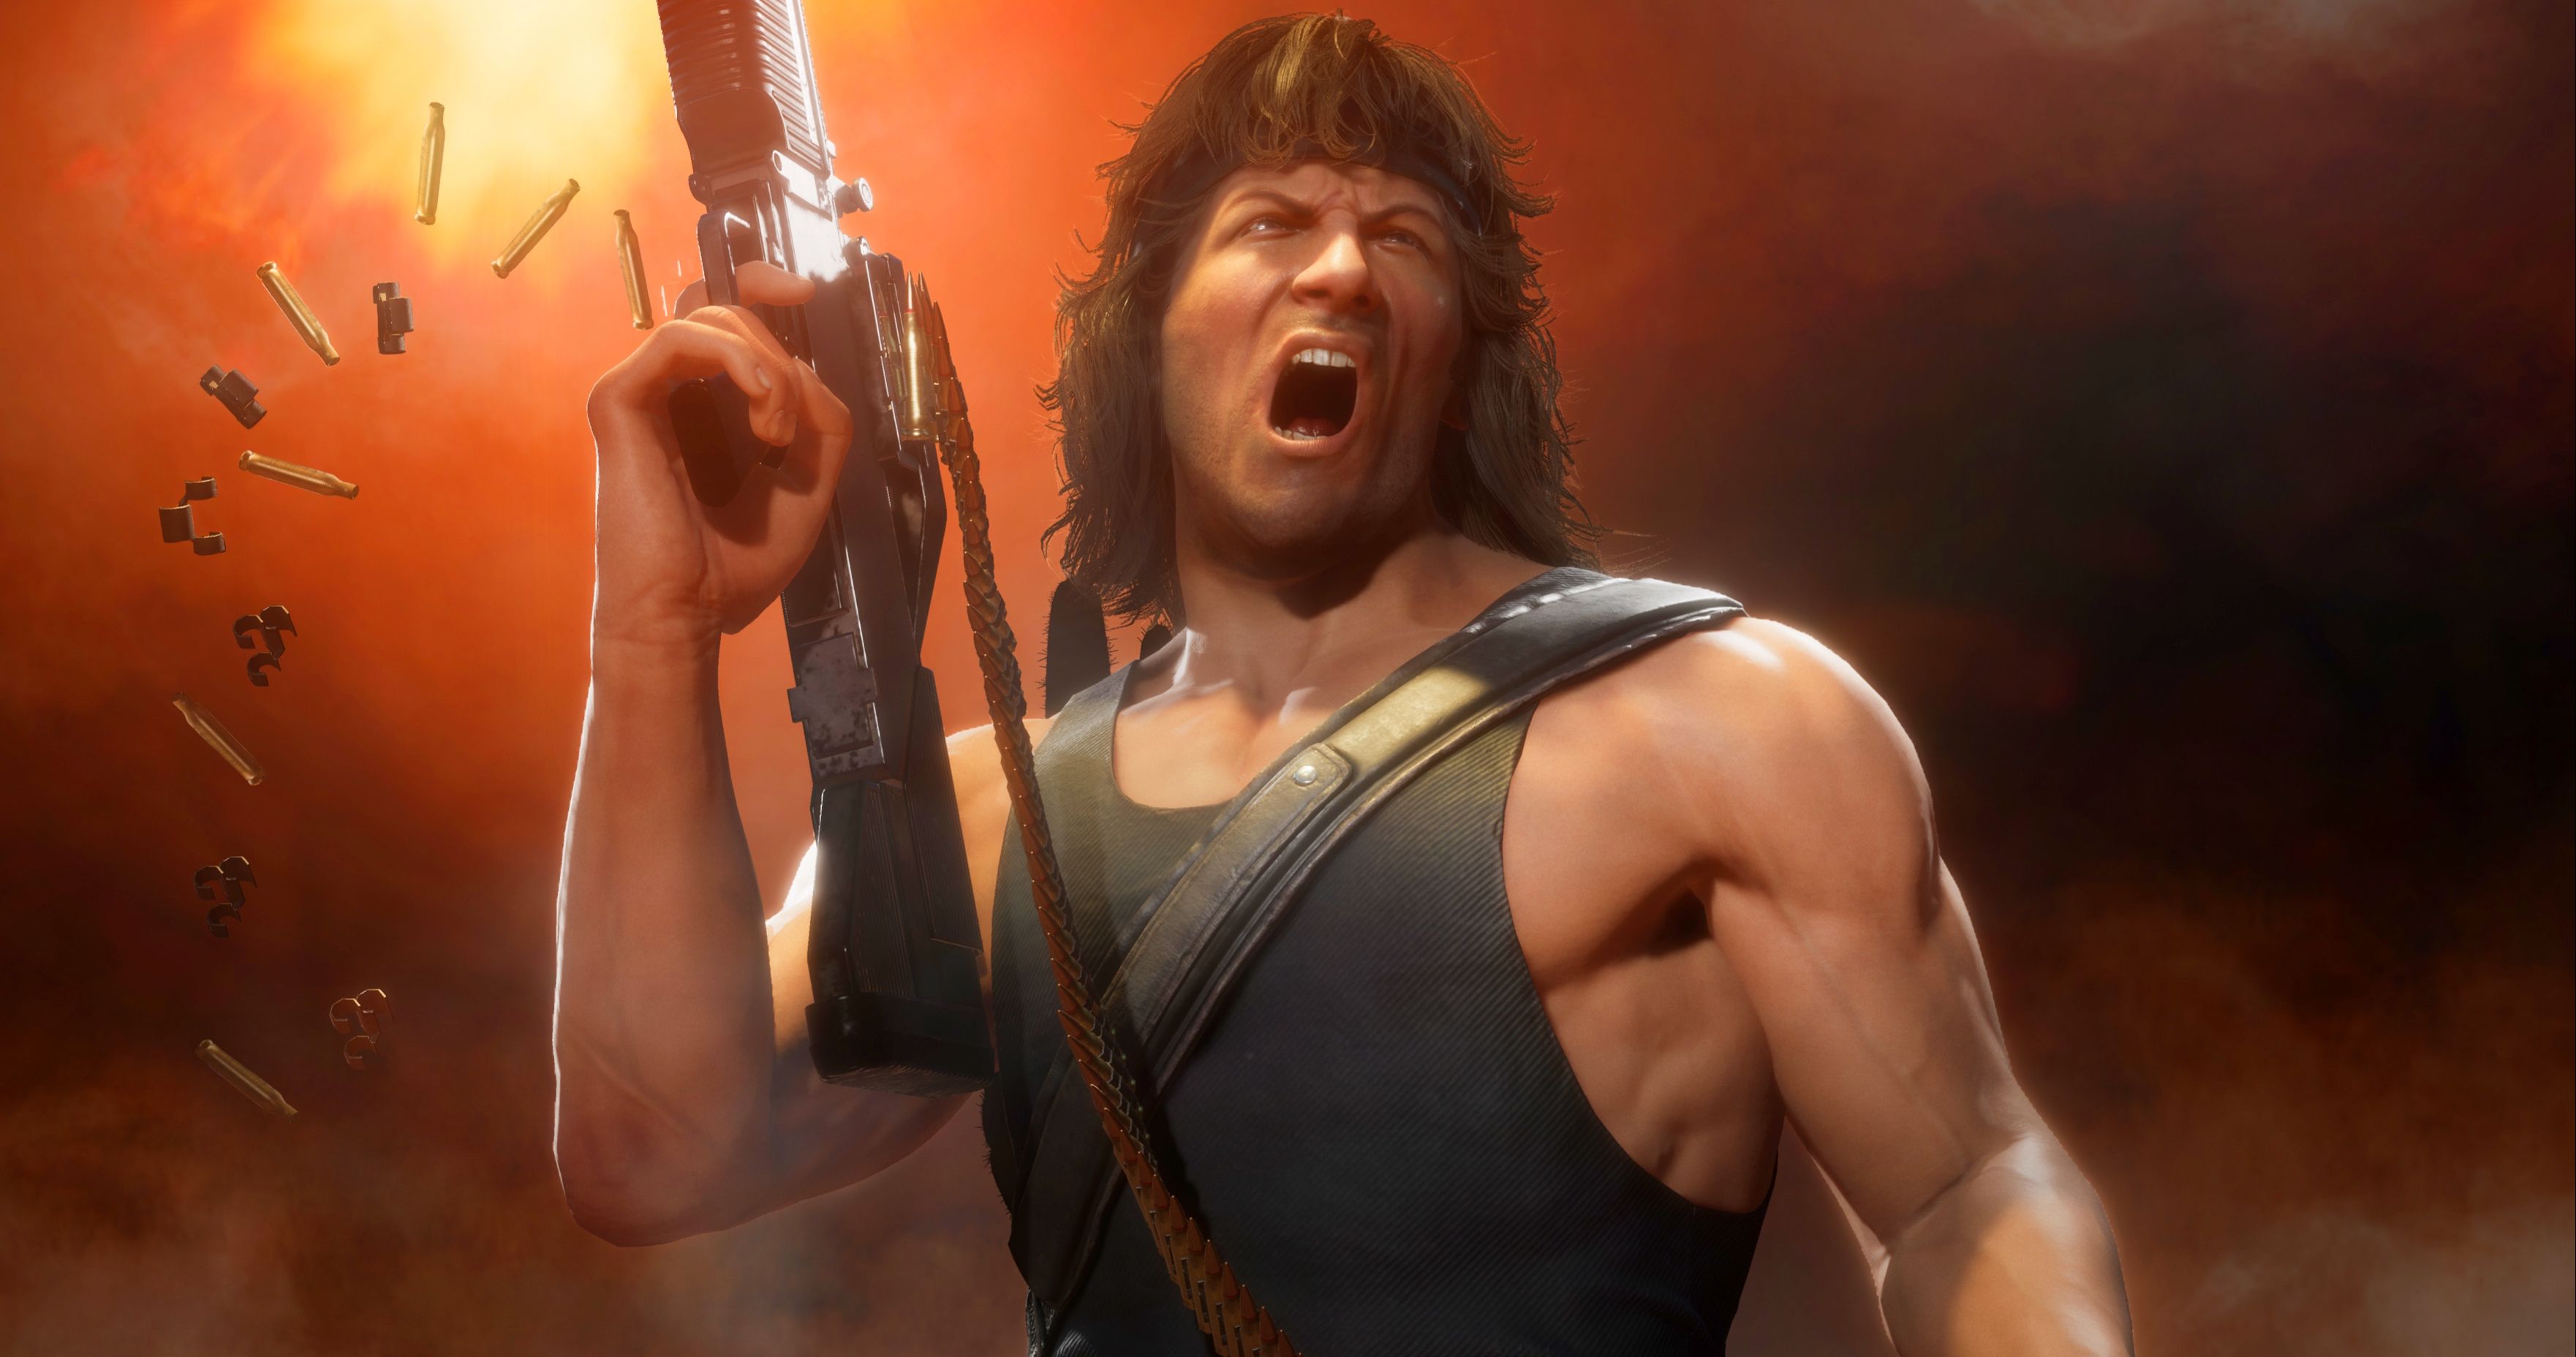 Rambo Is Unleashed in Mortal Kombat 11 Ultimate Video Game Trailer